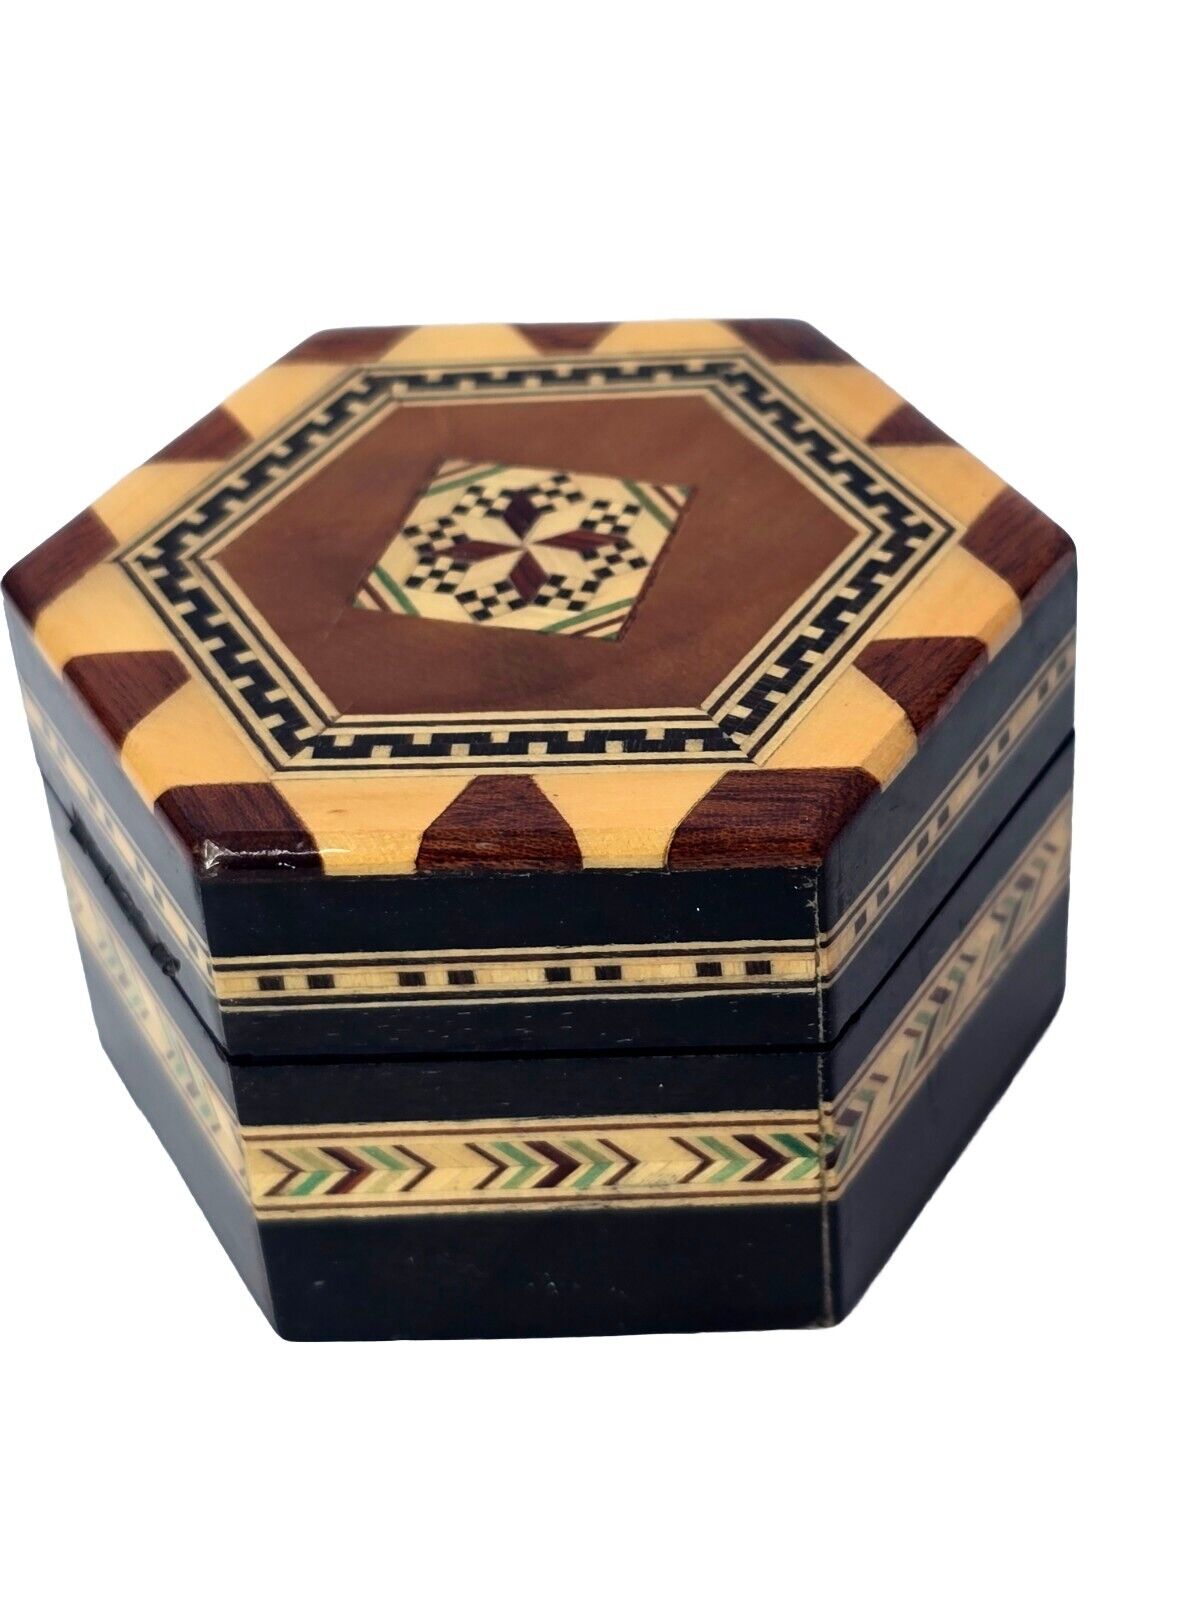 VINTAGE MARQUETRY ART INLAYED WOOD  TRINKET JEWELRY BOX REUGE SWISS 3x2\